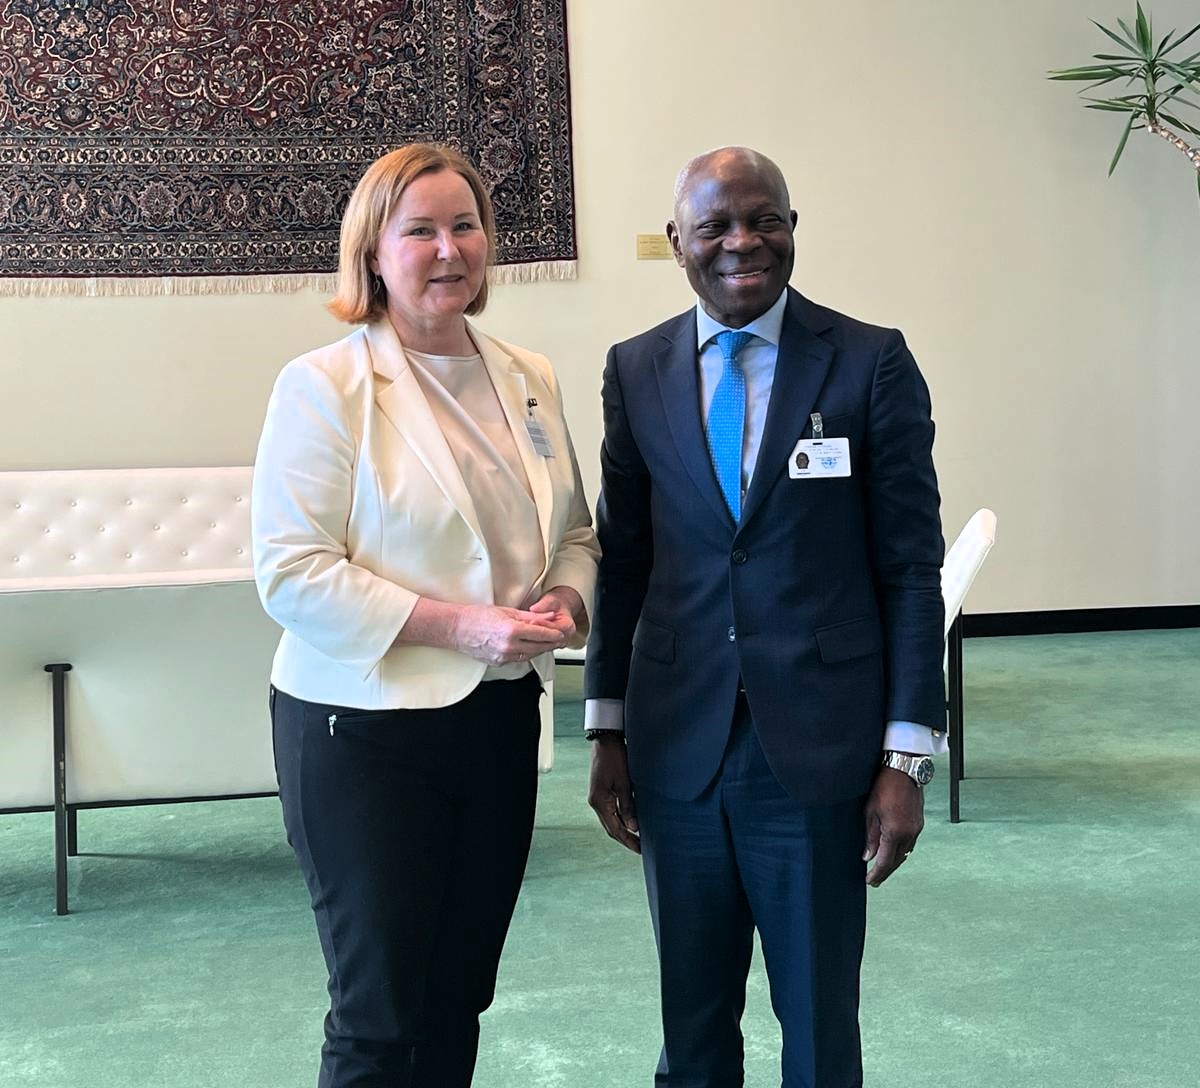 Good to meet @KaisaJuuso, Minister of Social Affairs & Health of Finland in New York. And delighted that Finland have joined the Global Coalition for #SocialJustice! We also discussed Finnish support to @ILO and the need to go beyond GDP and measure the well-being of societies.